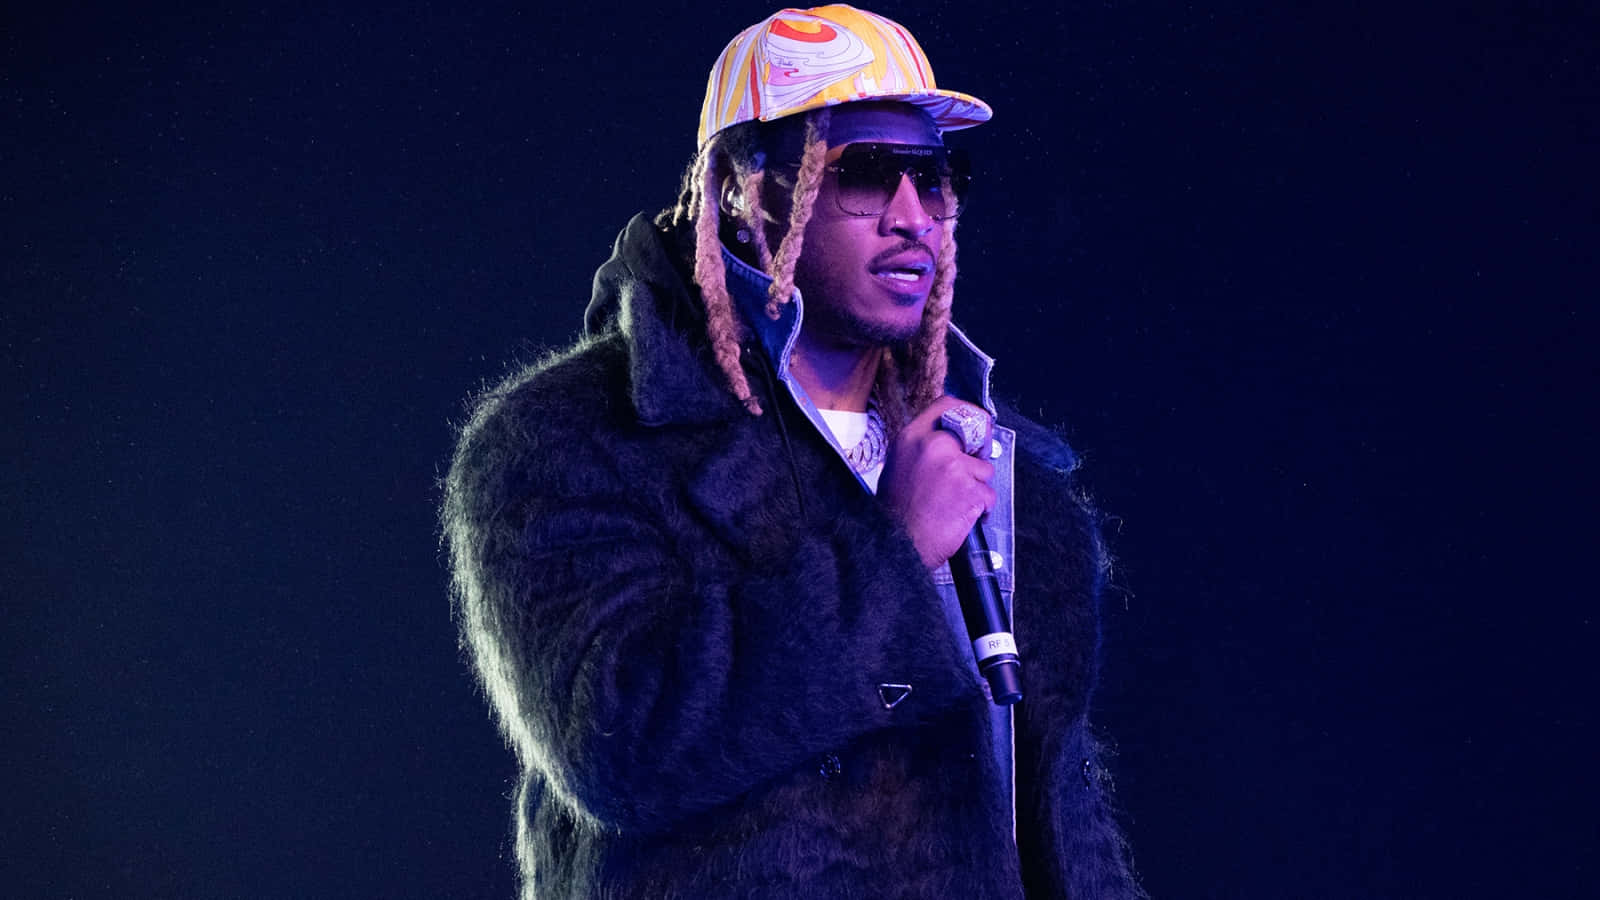 A Man In A Fur Coat And Hat Is Holding A Microphone Wallpaper